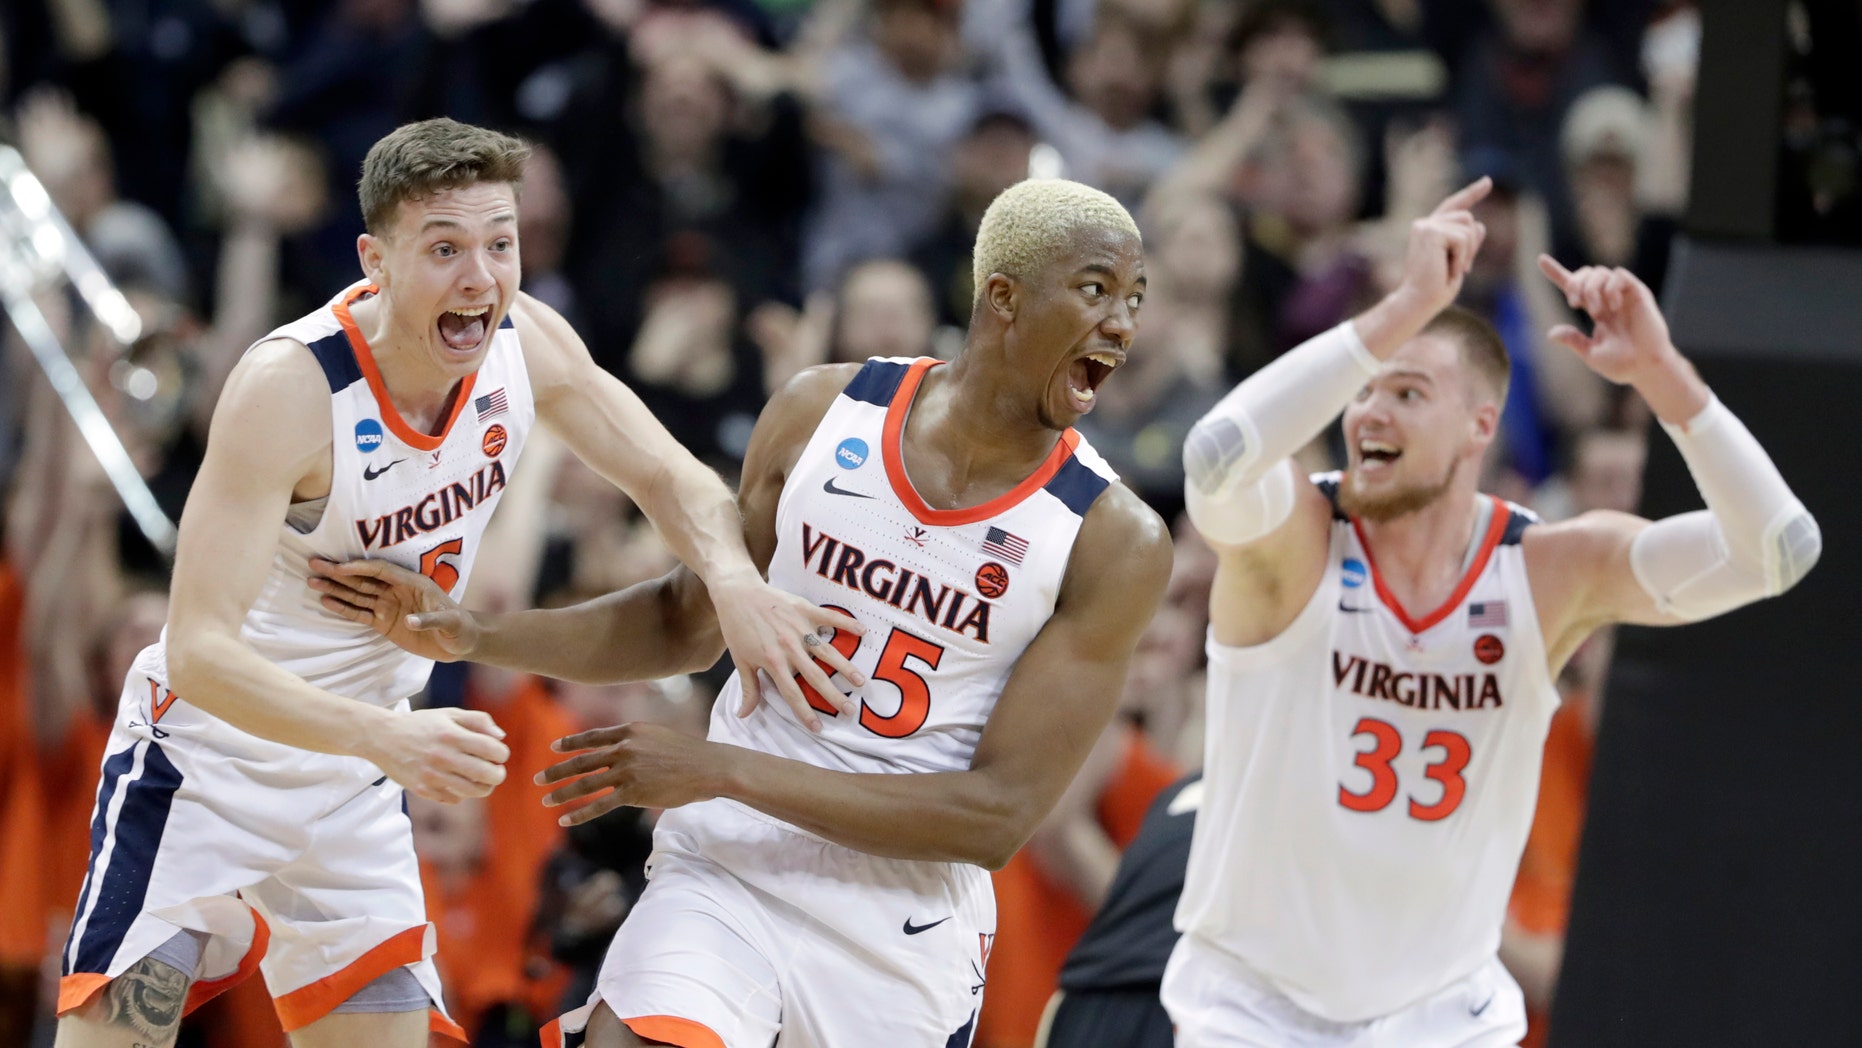 Mamadi Diakite of Virginia, center, reacts with teammates Kyle Guy and 33-year-old Jack Salt after firing a shot at overtime in the South Regional final of the NCAA tournament against Purdue, Saturday, March 30, 2019, in Louisville. , Ky. (Associated Press)